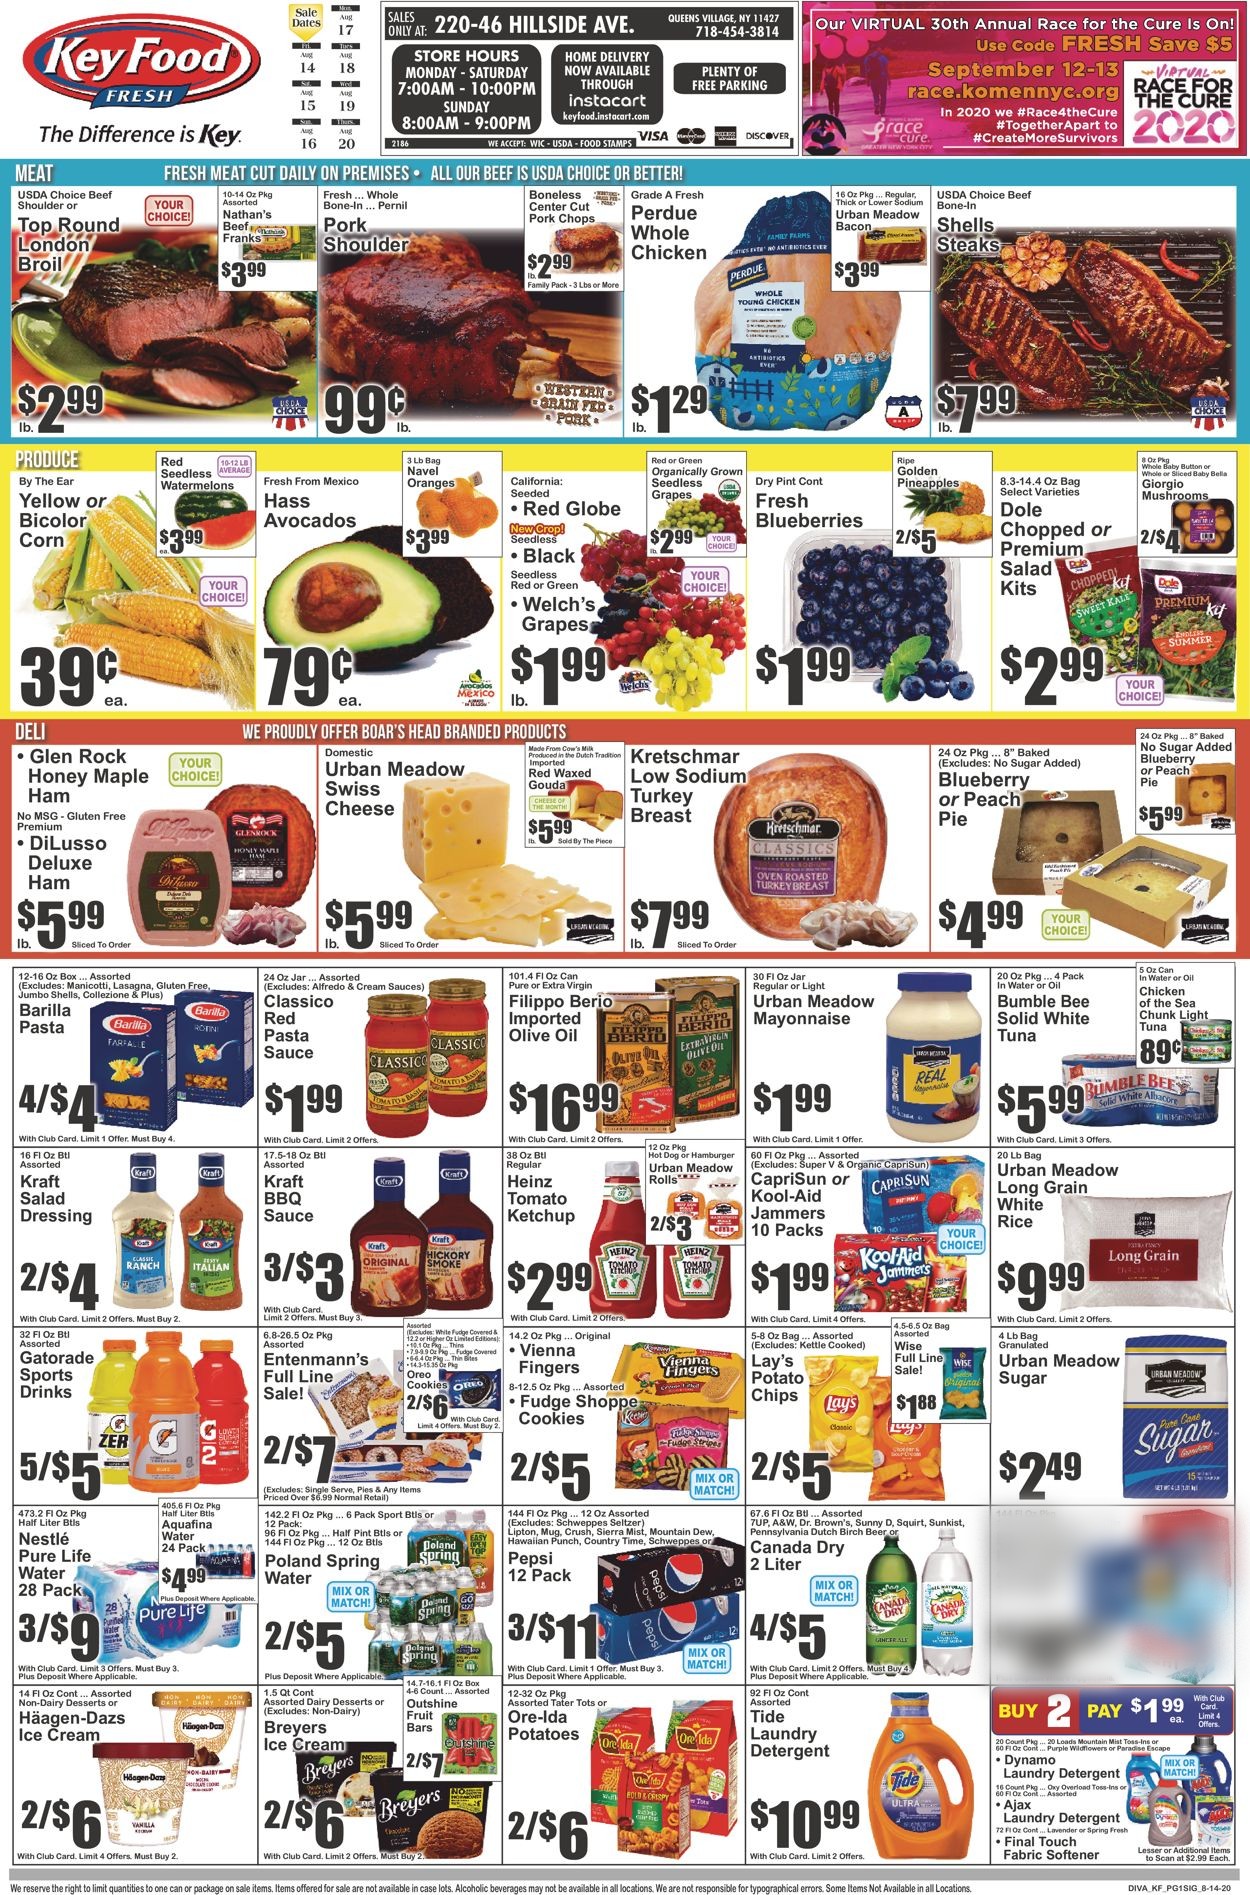 Key Food Current weekly ad 08/14 - 08/20/2020 - frequent-ads.com